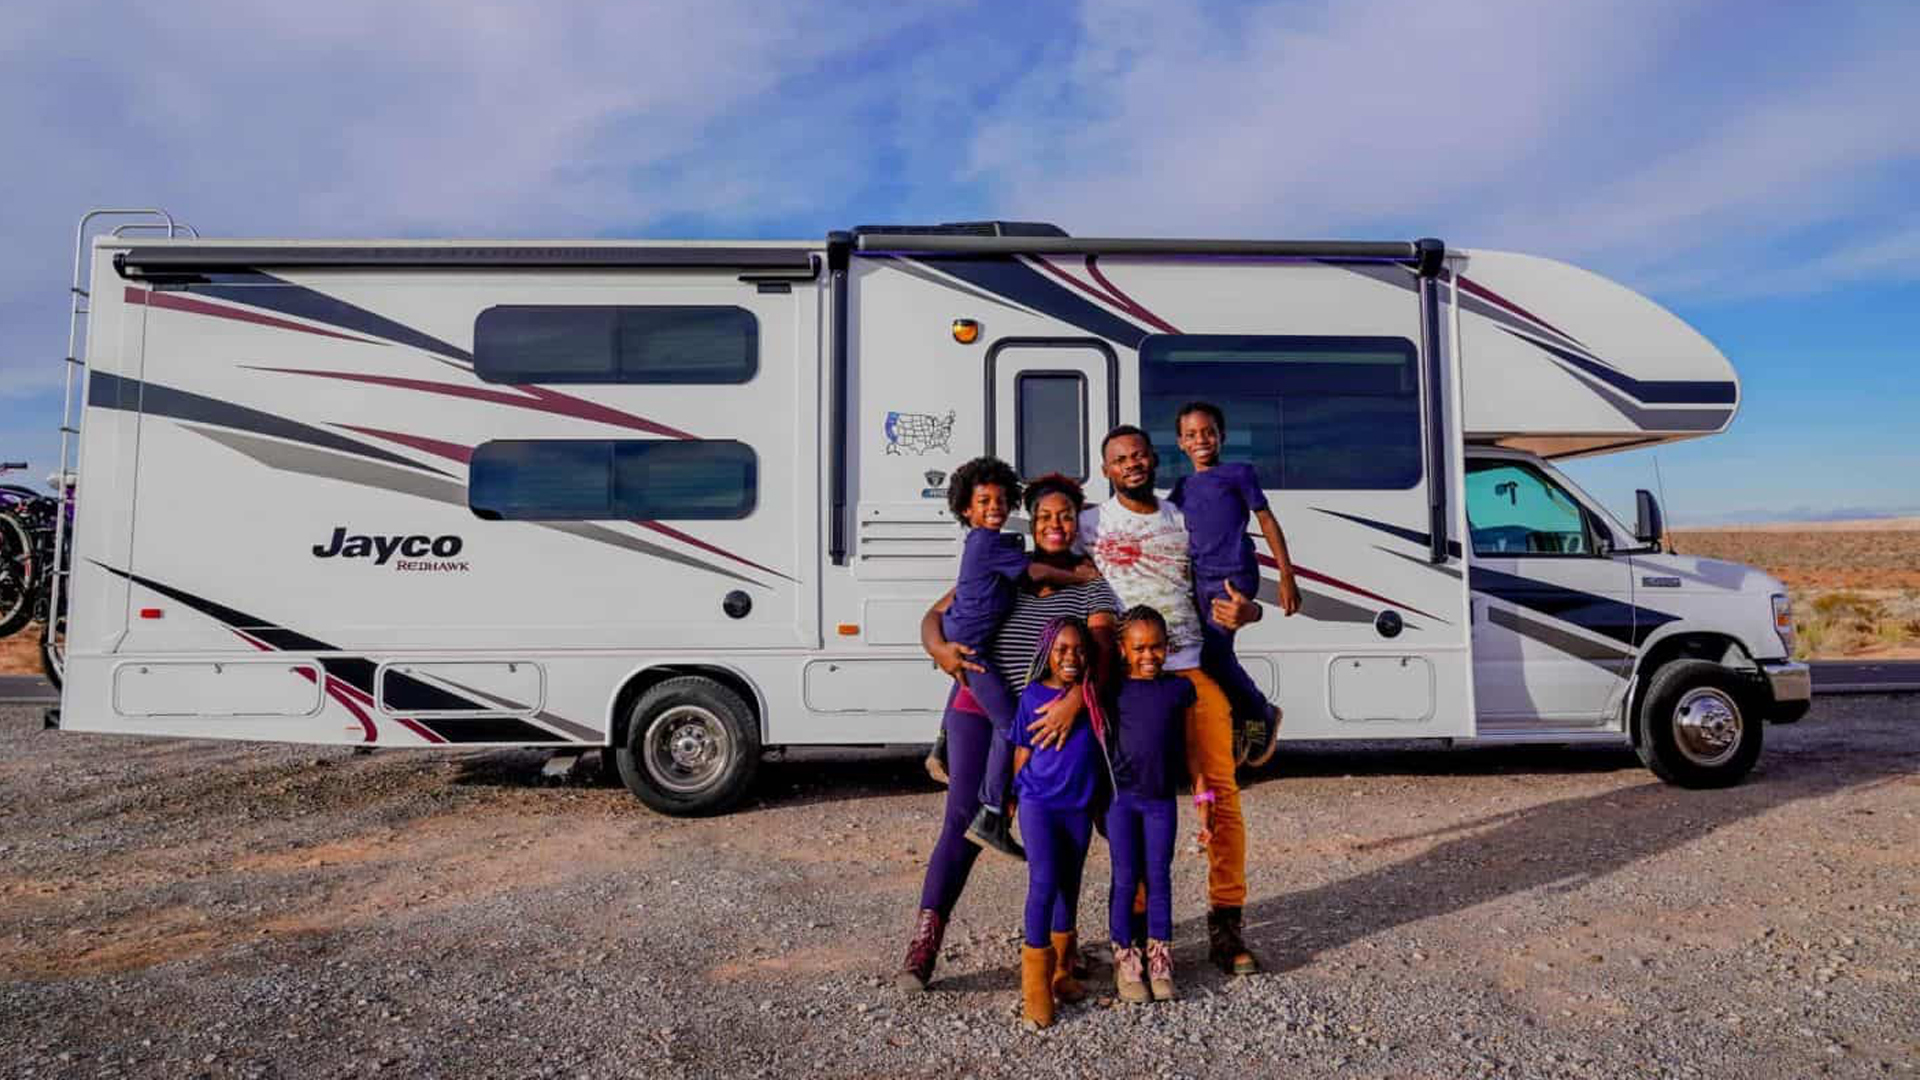 The Mom Trotter Eliminates $200K In Debt Over 18 Months Living In RV